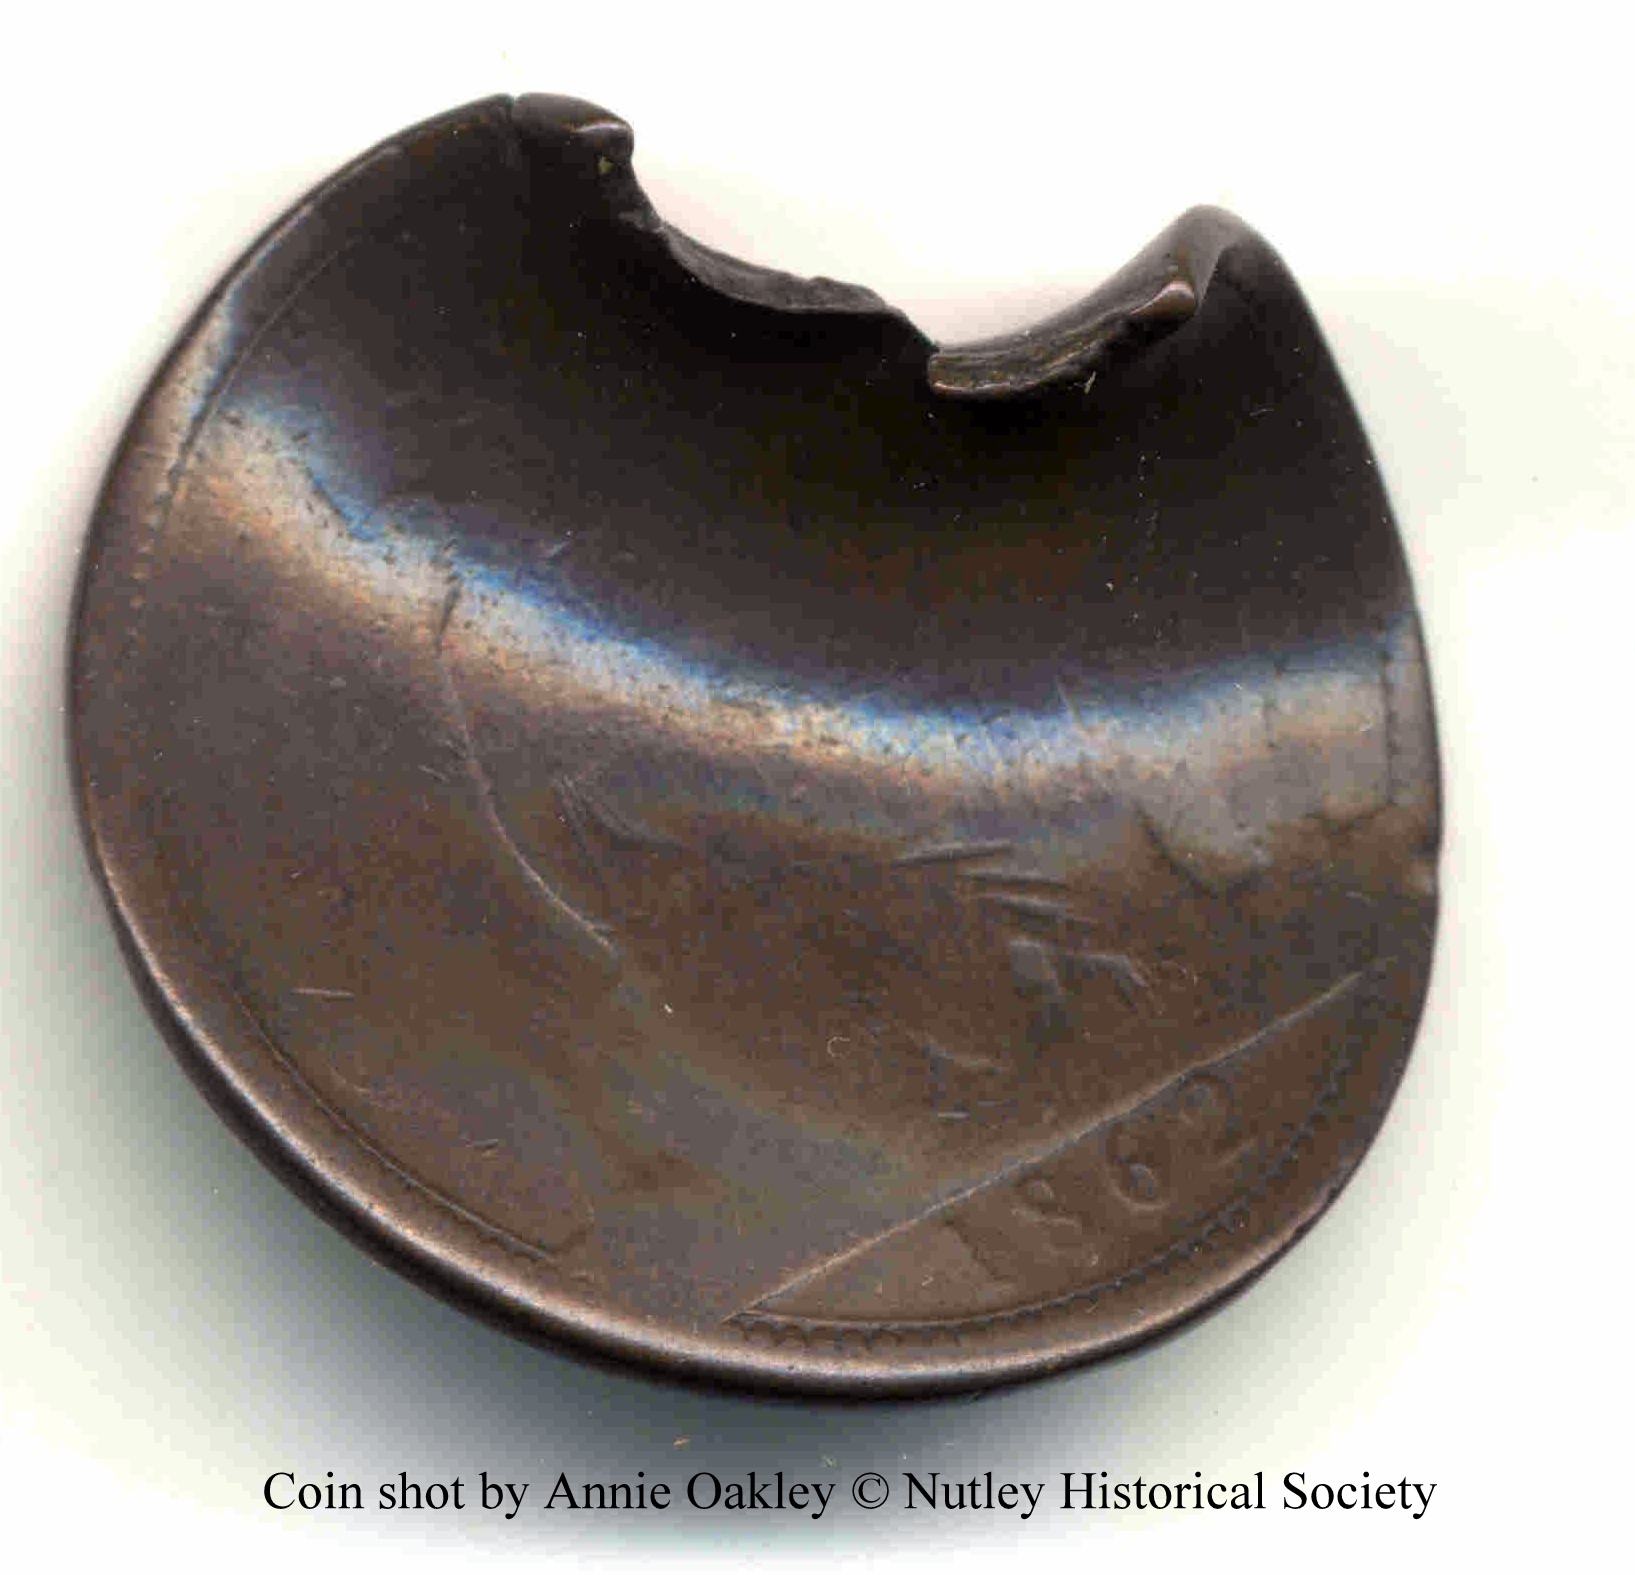 Coin shot by sharpshooter Annie Oakley - Nutley Museum, Nutley, NJ